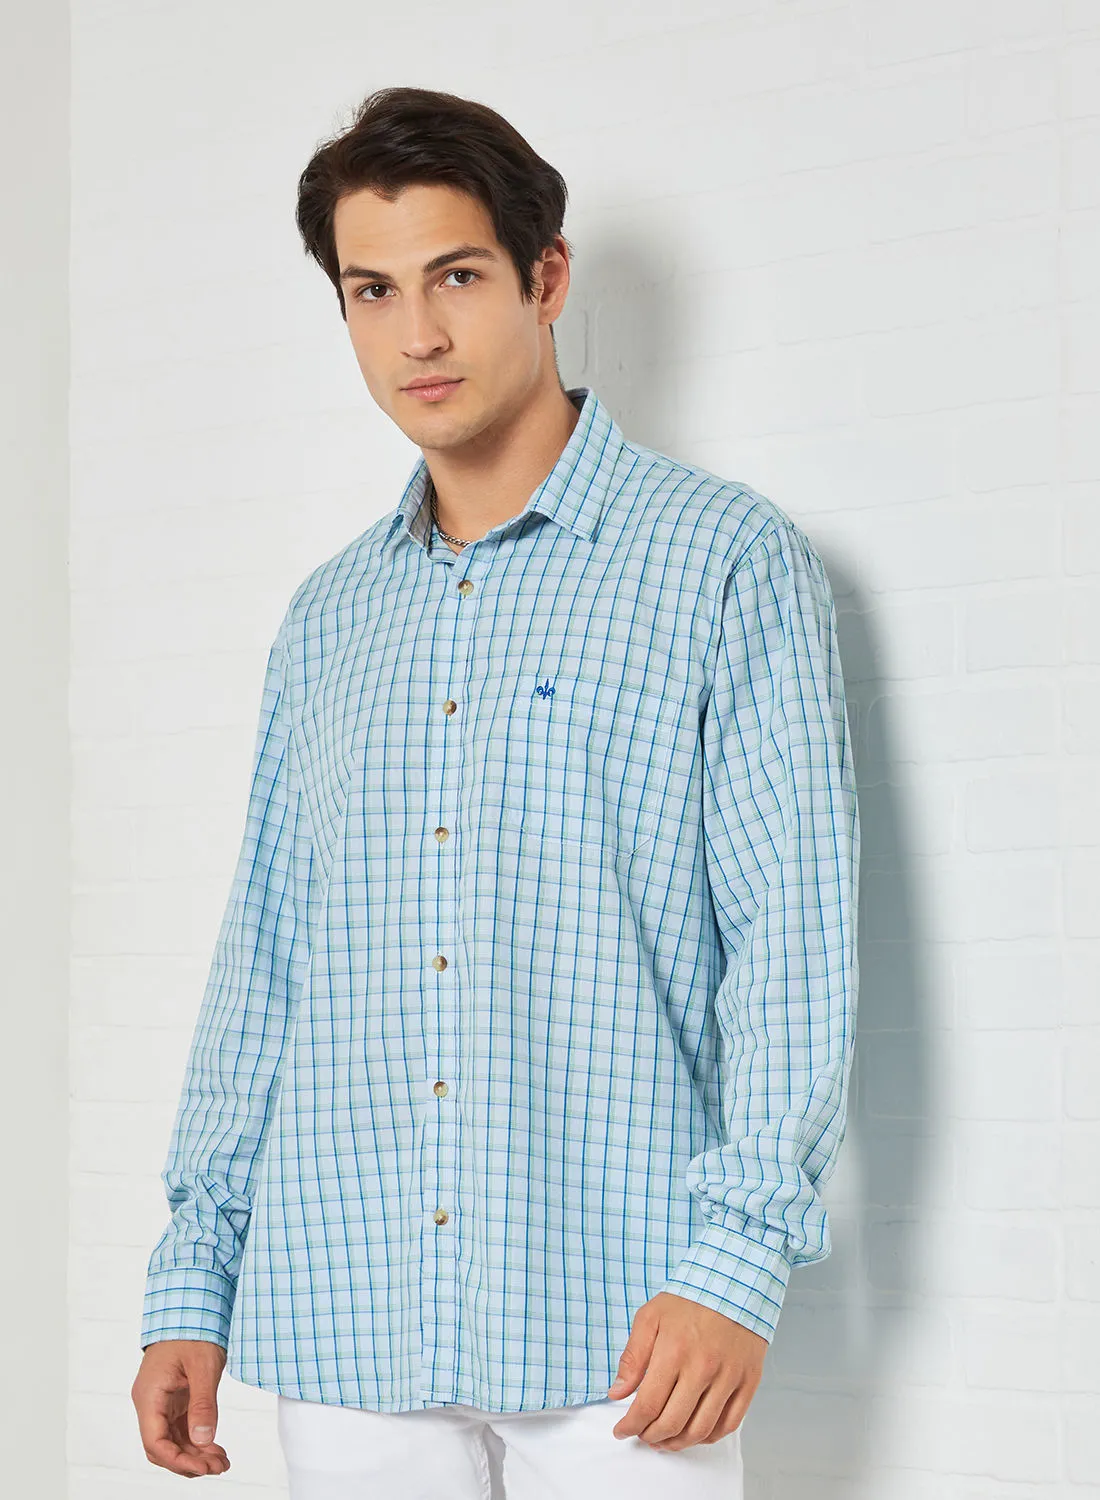 QUWA Casual Checked Pattern Shirt Primary Sky Blue